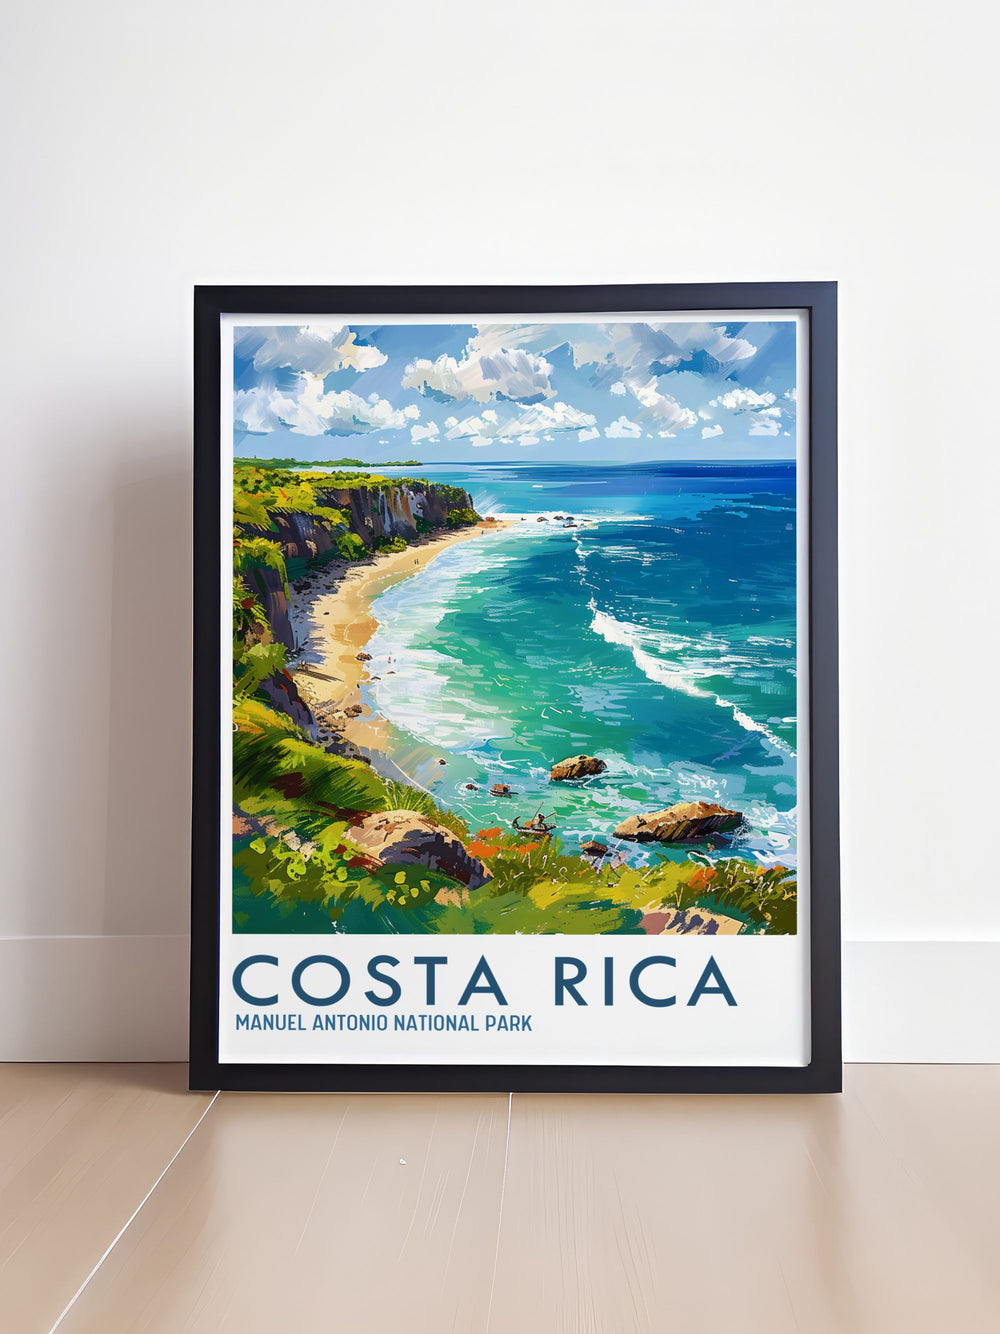 Relive your adventures in Manuel Antonio National Park with this exquisite art print. Featuring the parks lush rainforests, serene beaches, and abundant wildlife, this poster is ideal for adding a touch of tropical charm to your decor. Perfect for anyone who loves Costa Ricas natural beauty.